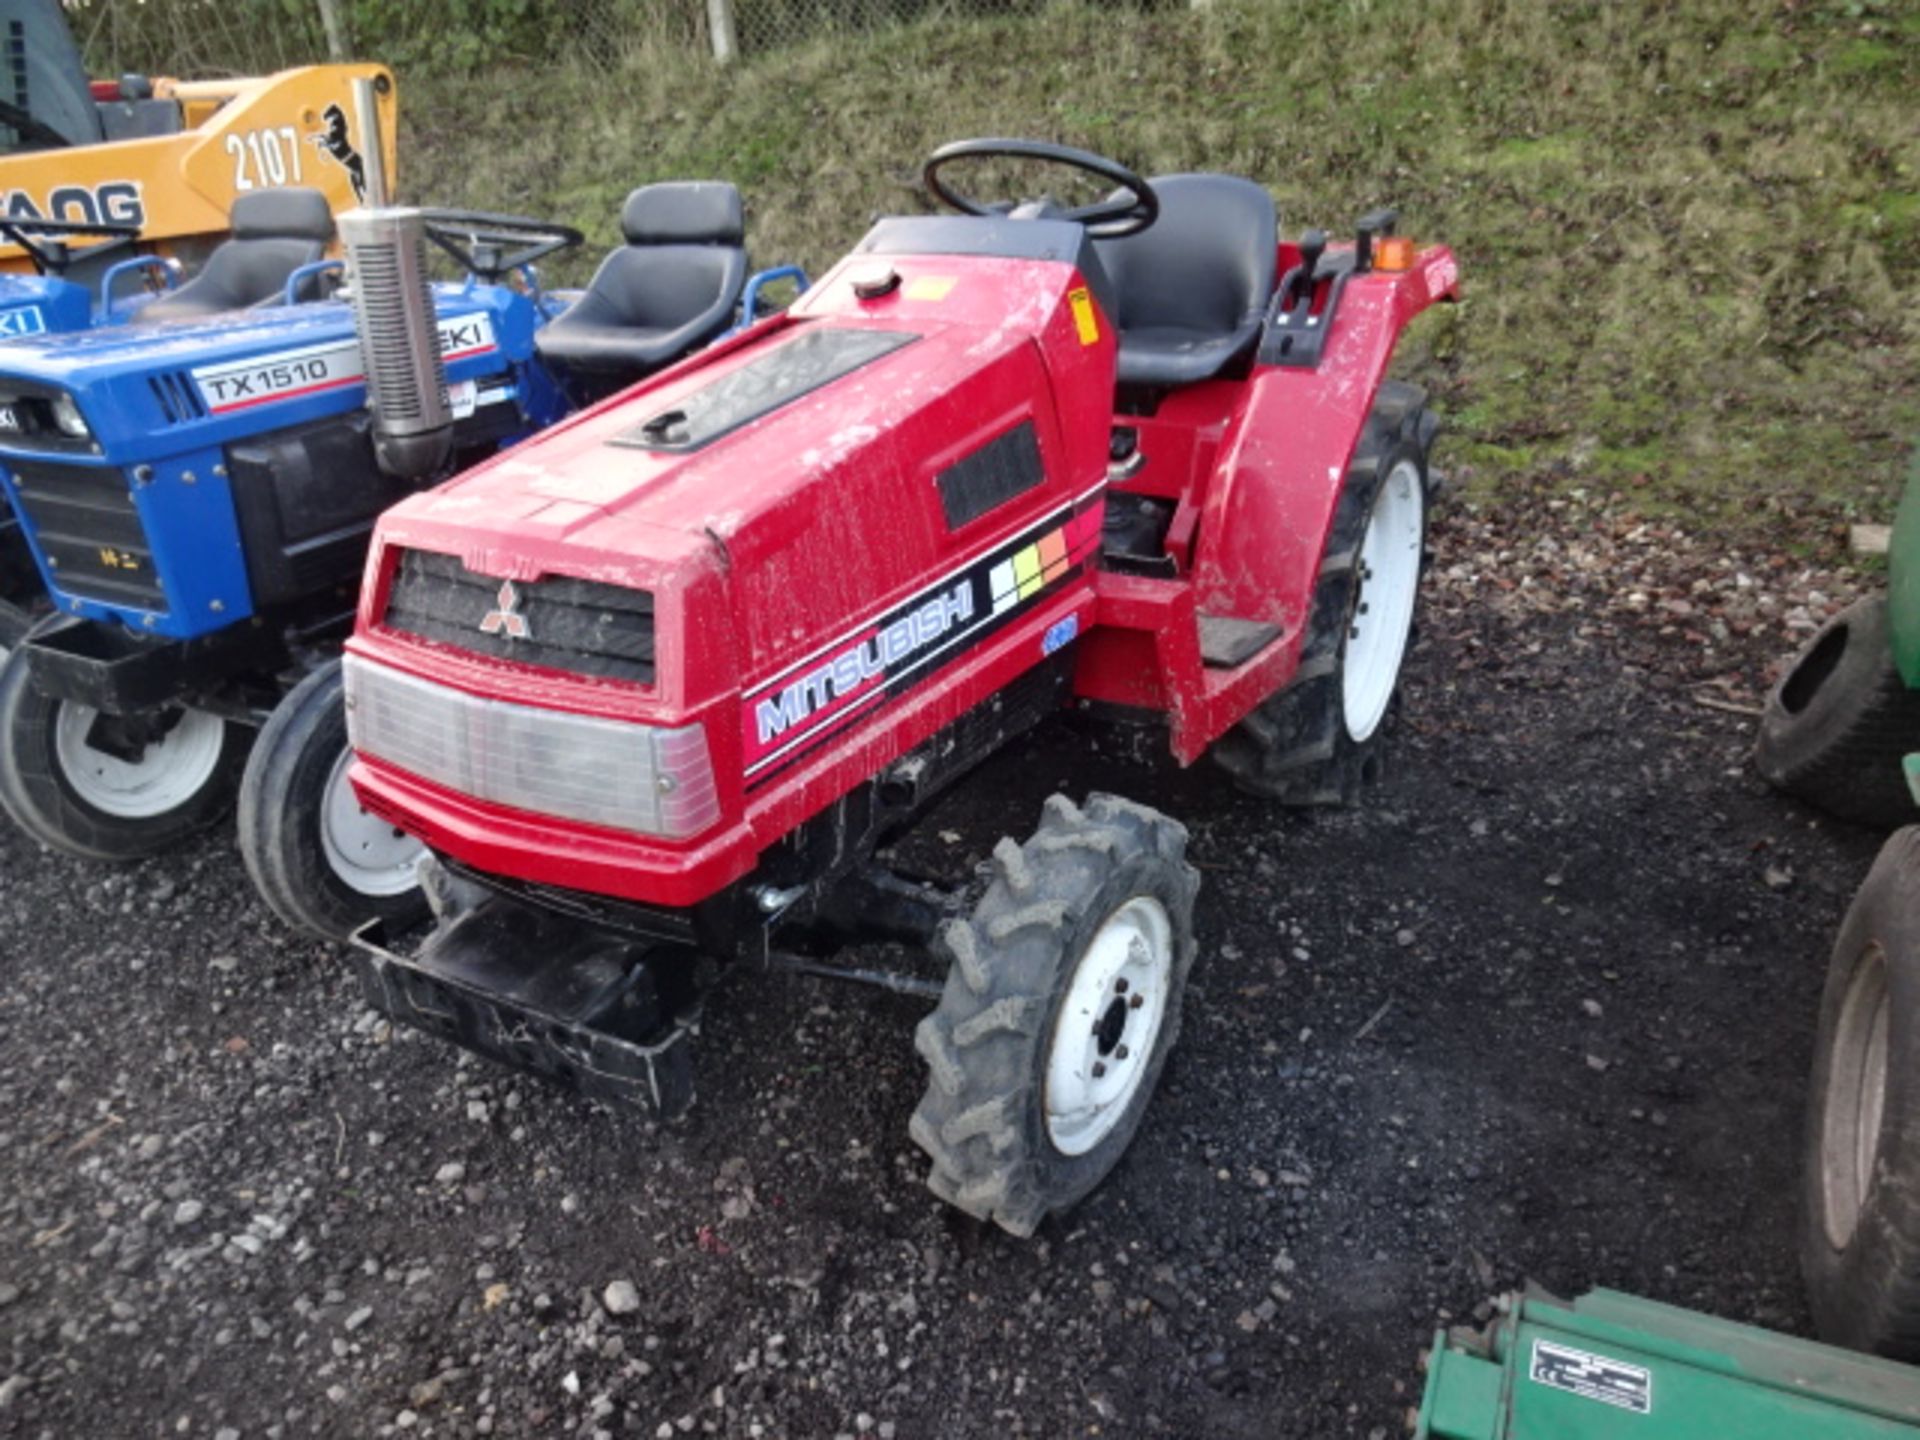 MITSUBISHI MT16D 4wd tractor c/w 3 point linkage & pto, 828 hours (R&D) - Image 2 of 4